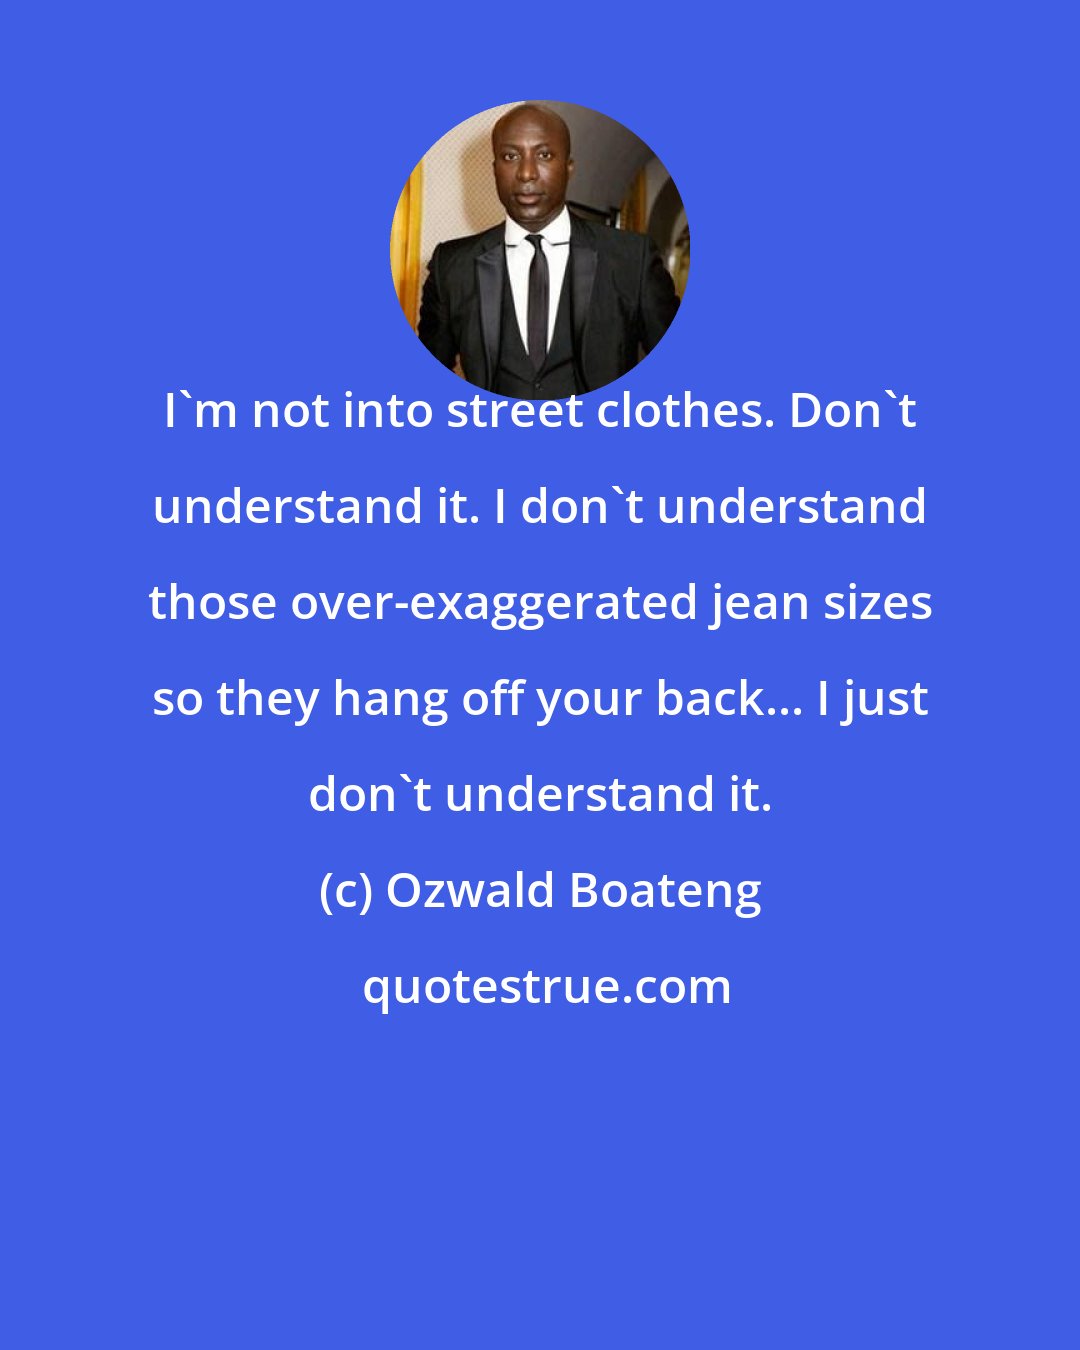 Ozwald Boateng: I'm not into street clothes. Don't understand it. I don't understand those over-exaggerated jean sizes so they hang off your back... I just don't understand it.